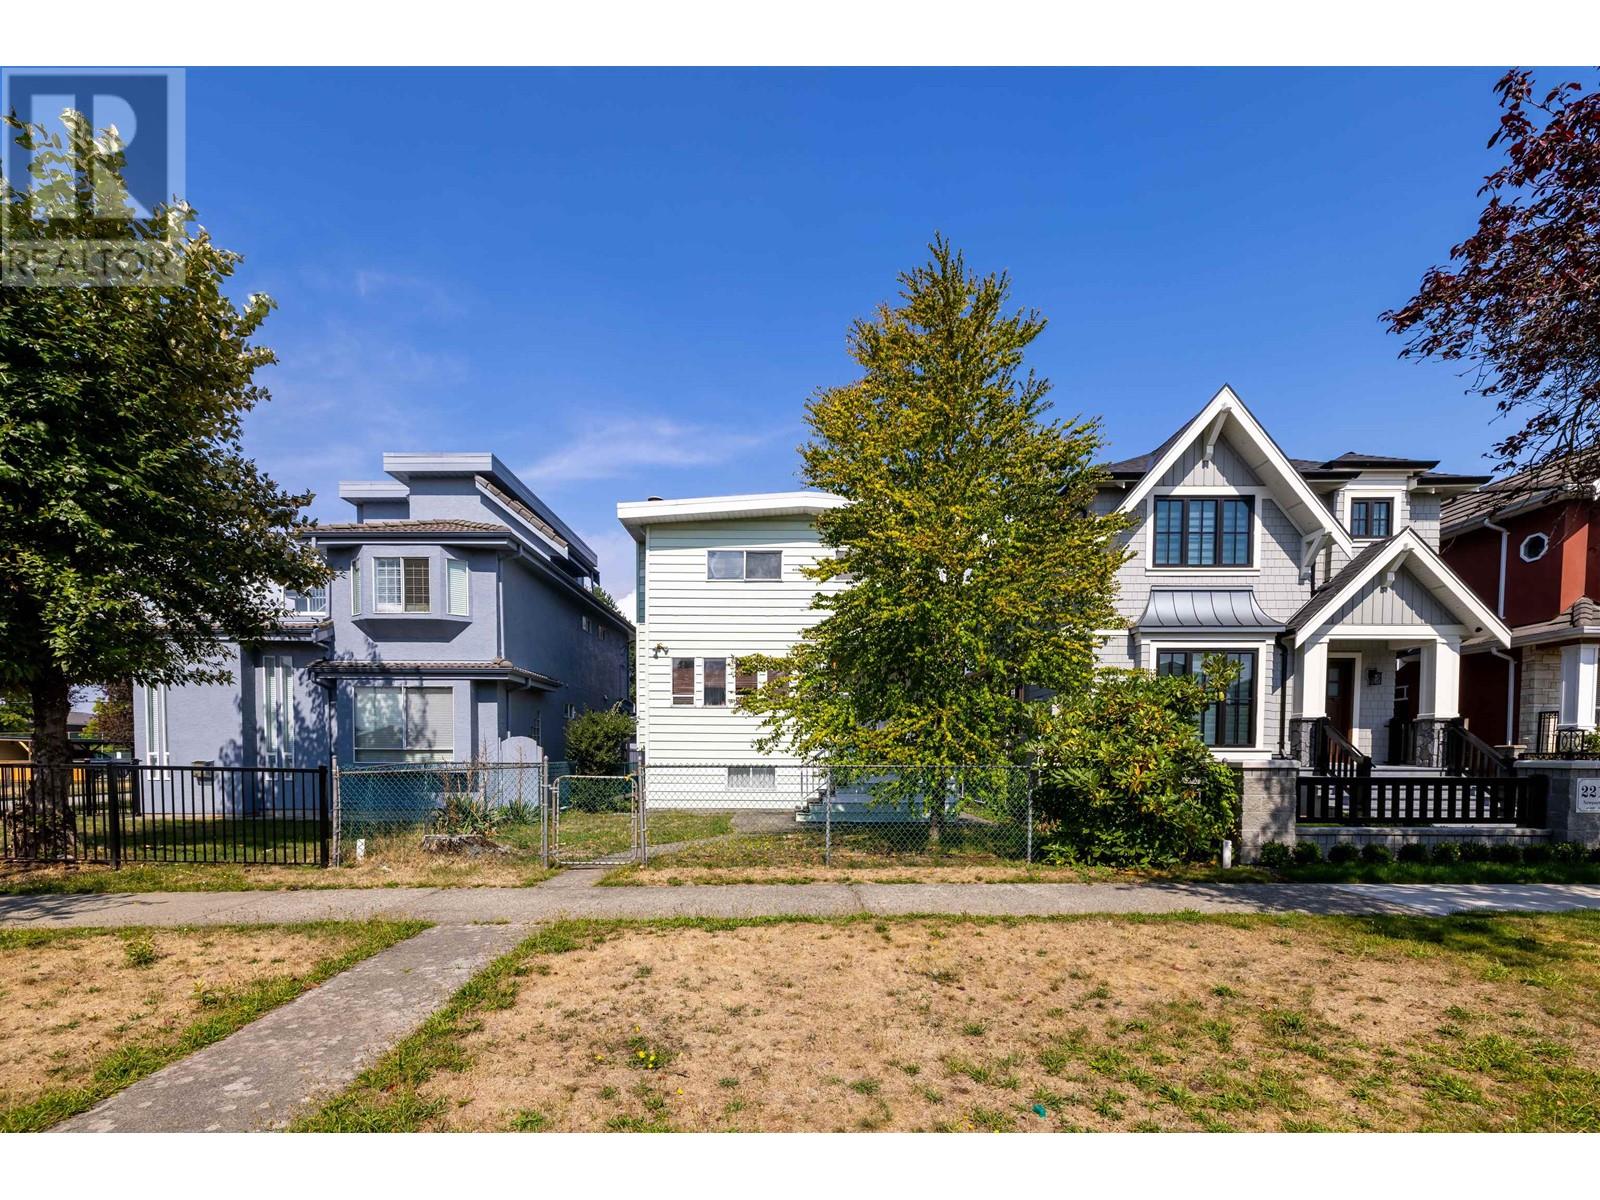 Listing Picture 2 of 16 : 2205 NEWPORT AVENUE, Vancouver / 溫哥華 - 魯藝地產 Yvonne Lu Group - MLS Medallion Club Member